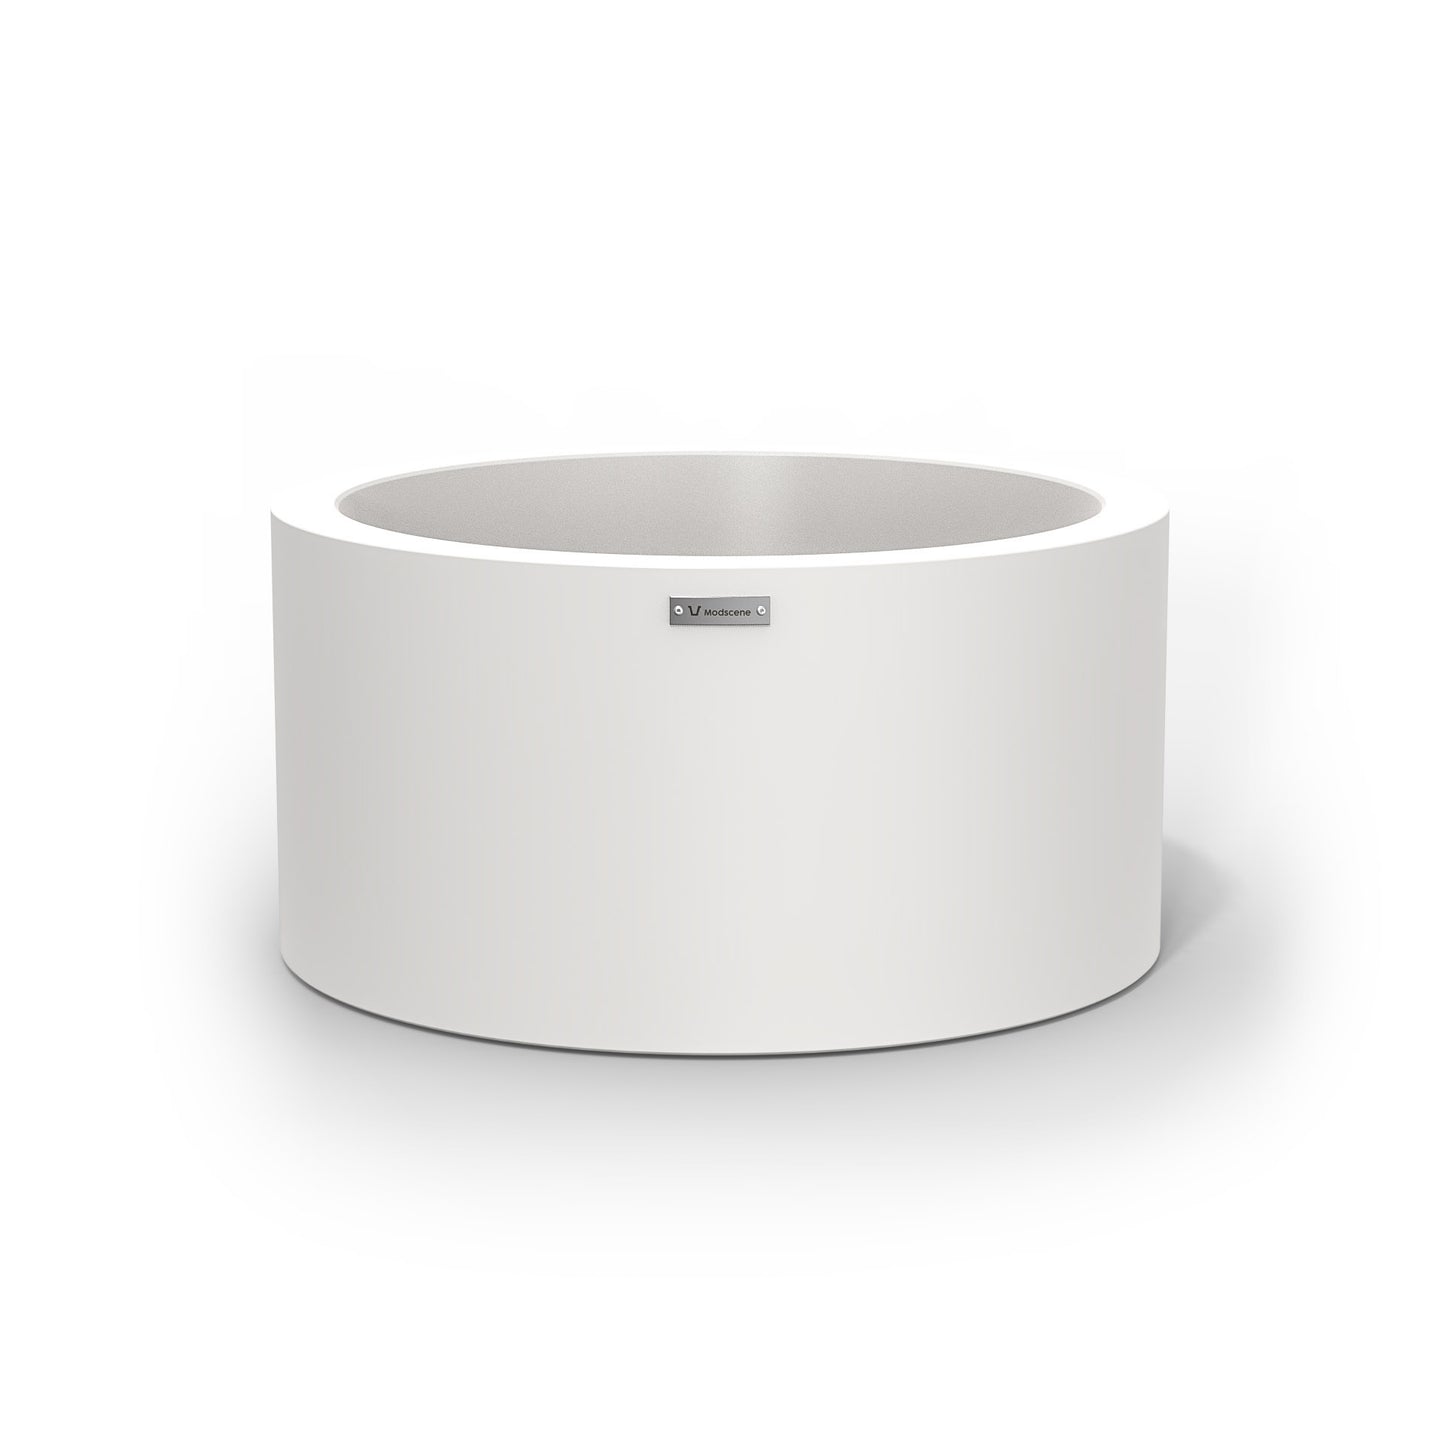 A white cylinder pot planter made by Modscene.